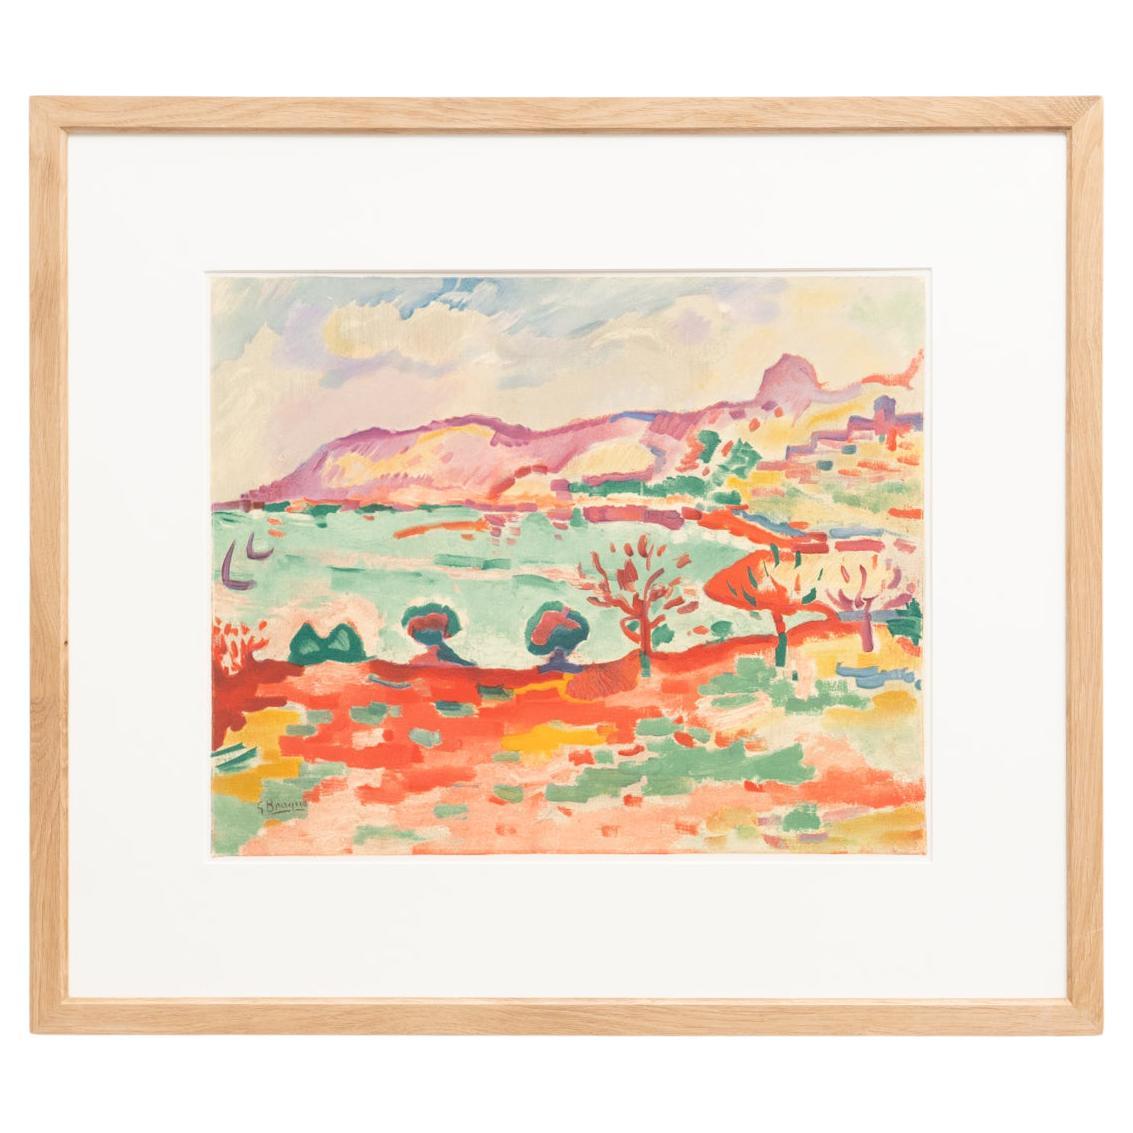 Step into the enchanting world of Georges Braque with the original 'Paysage à l'Estaque' color lithograph, a masterpiece painted in France circa 1906. This lithograph, edited and printed in France in the 1970s, captures the essence of Braque's